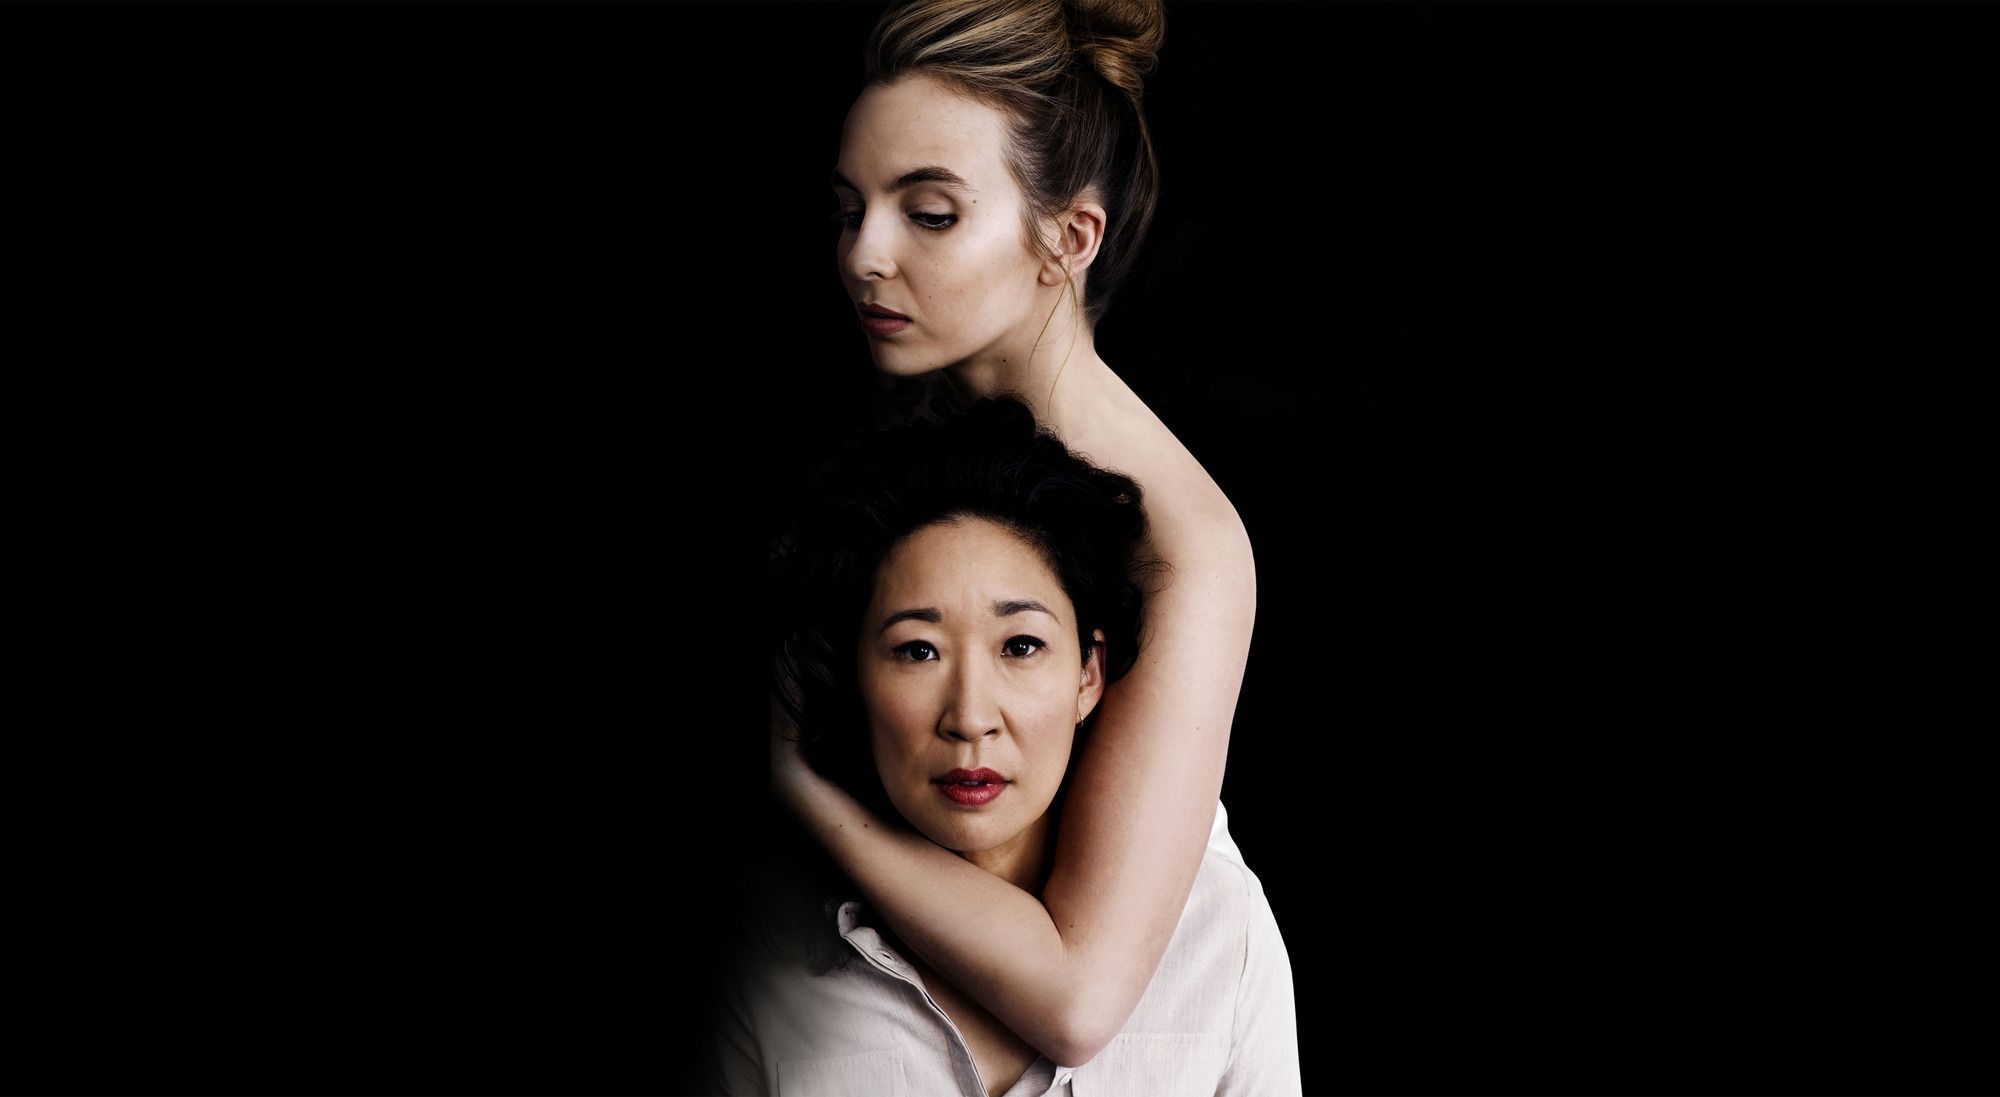 killing eve book and series sandra oh jodie comer